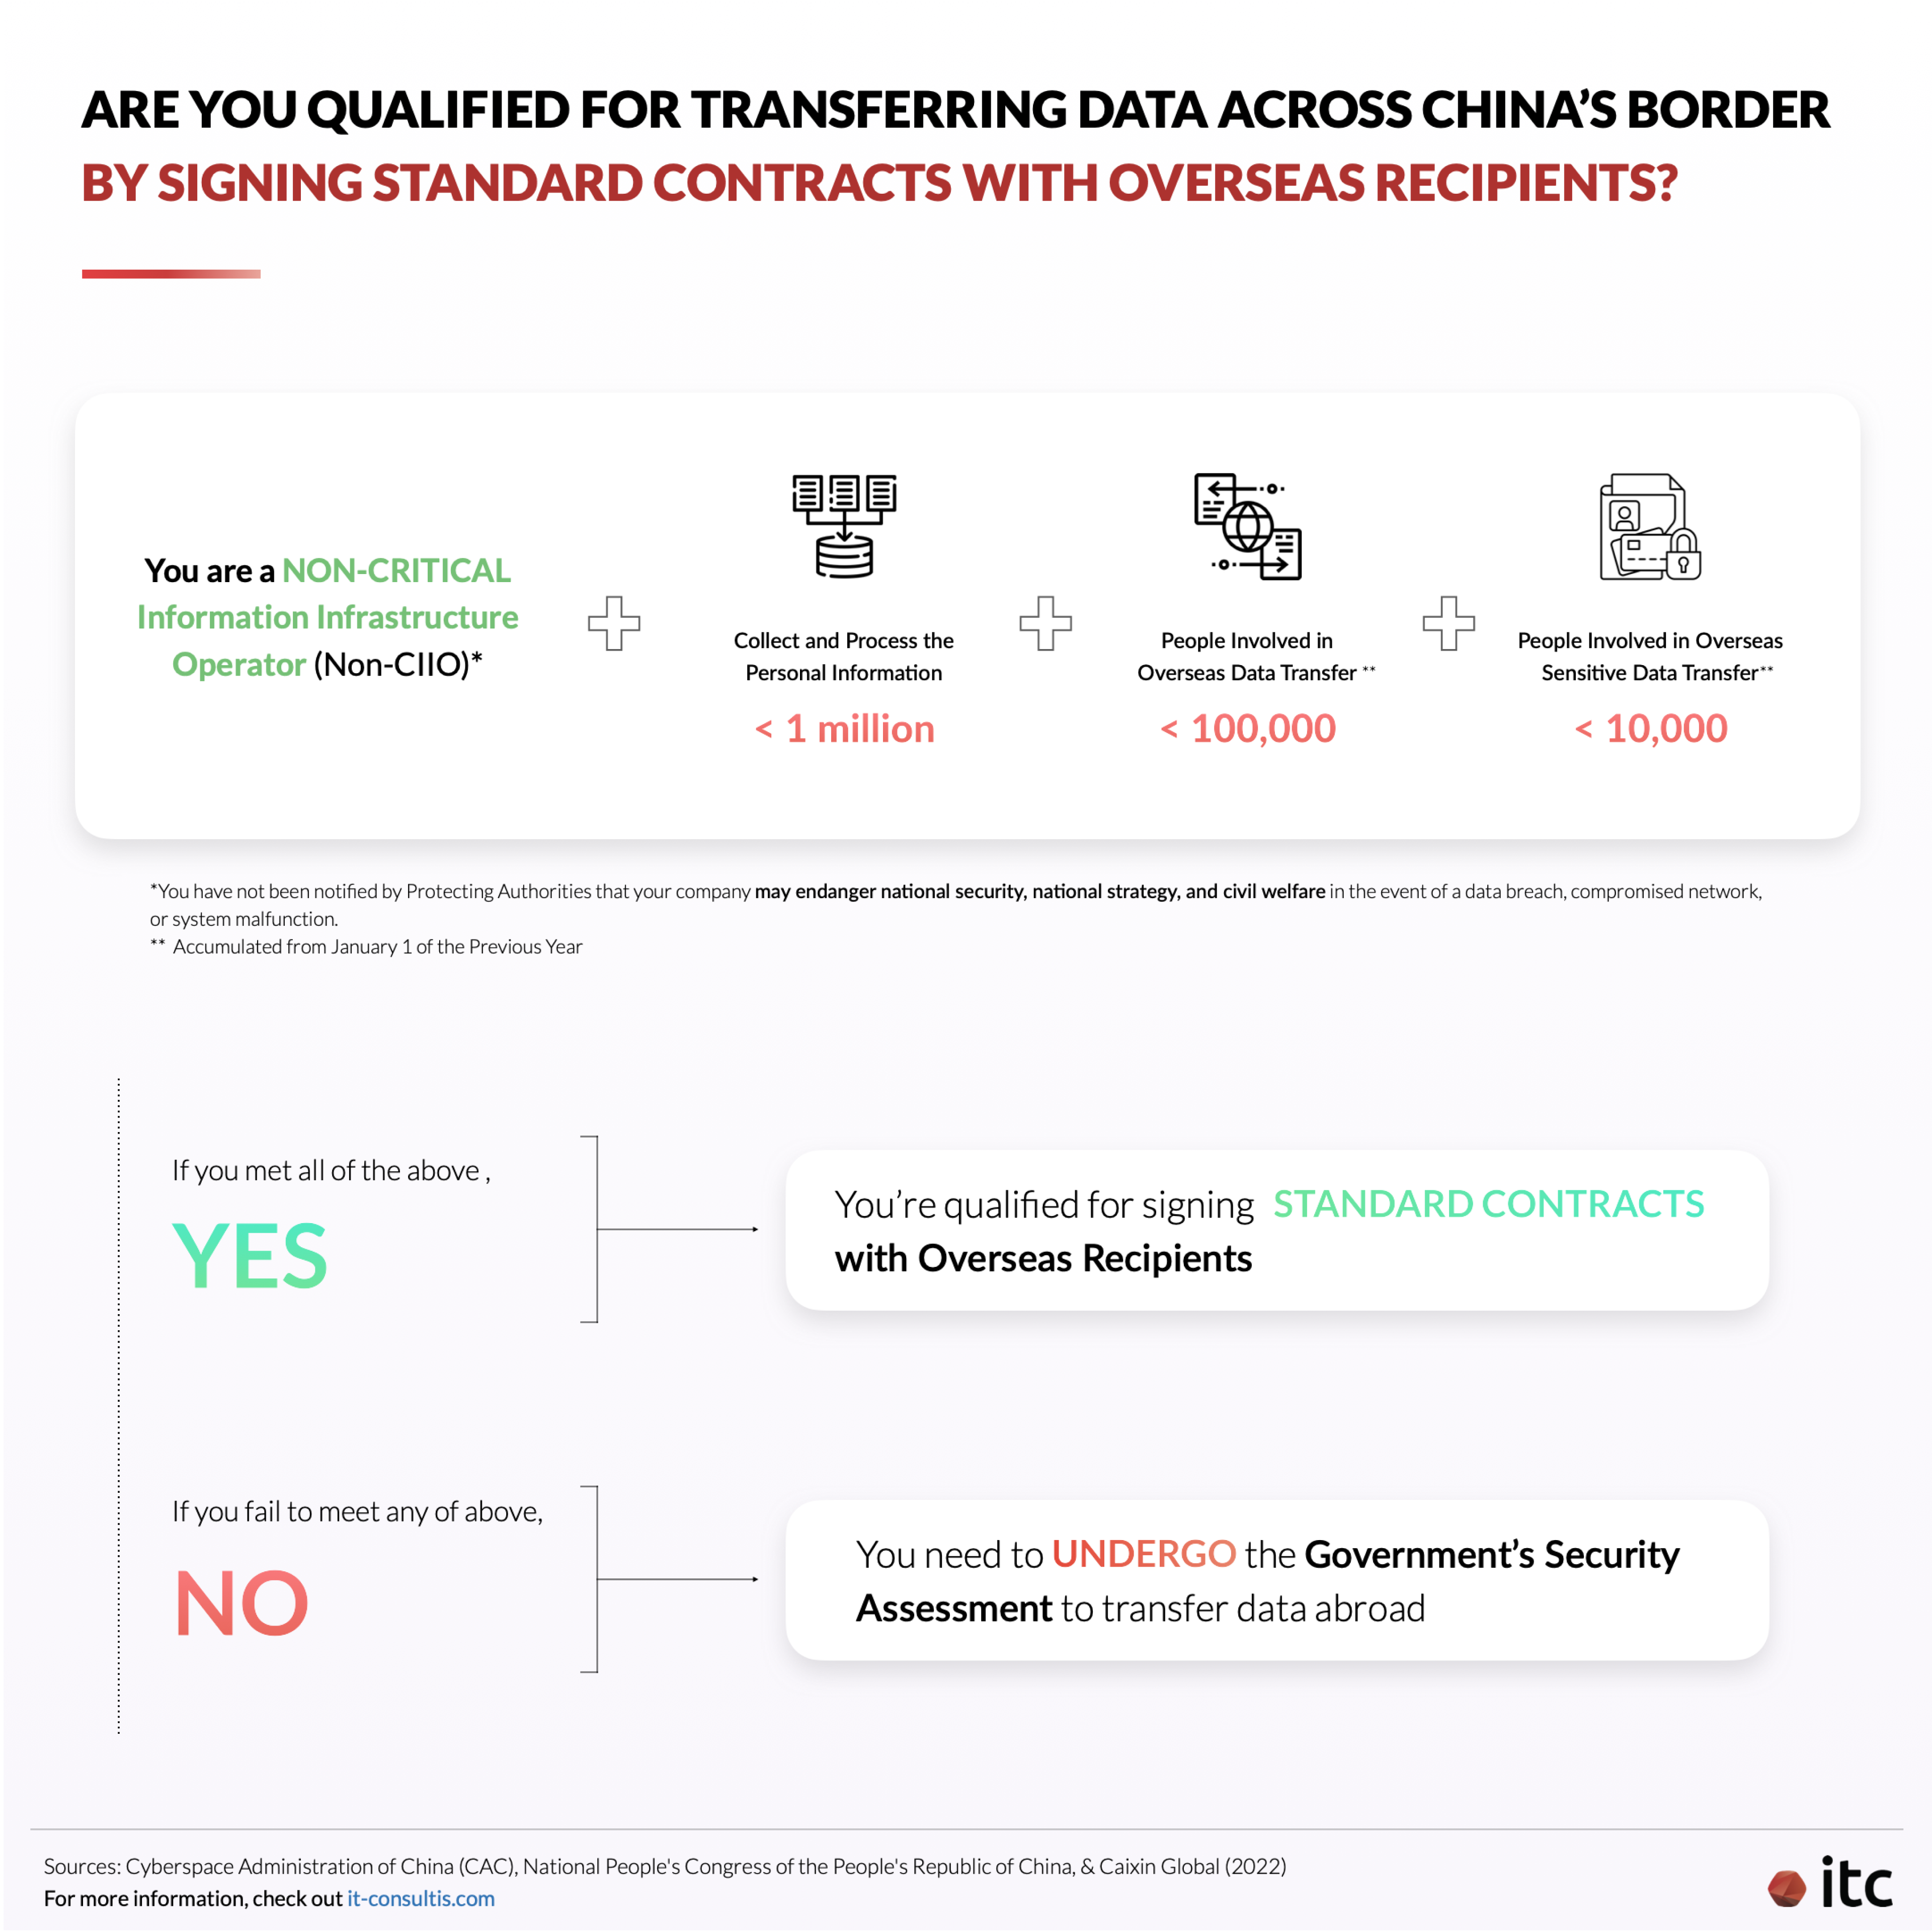 A chart illustrating 4 main criteria brands need to meet to qualify for transferring data across China's border by signing standard contracts with overseas recipients